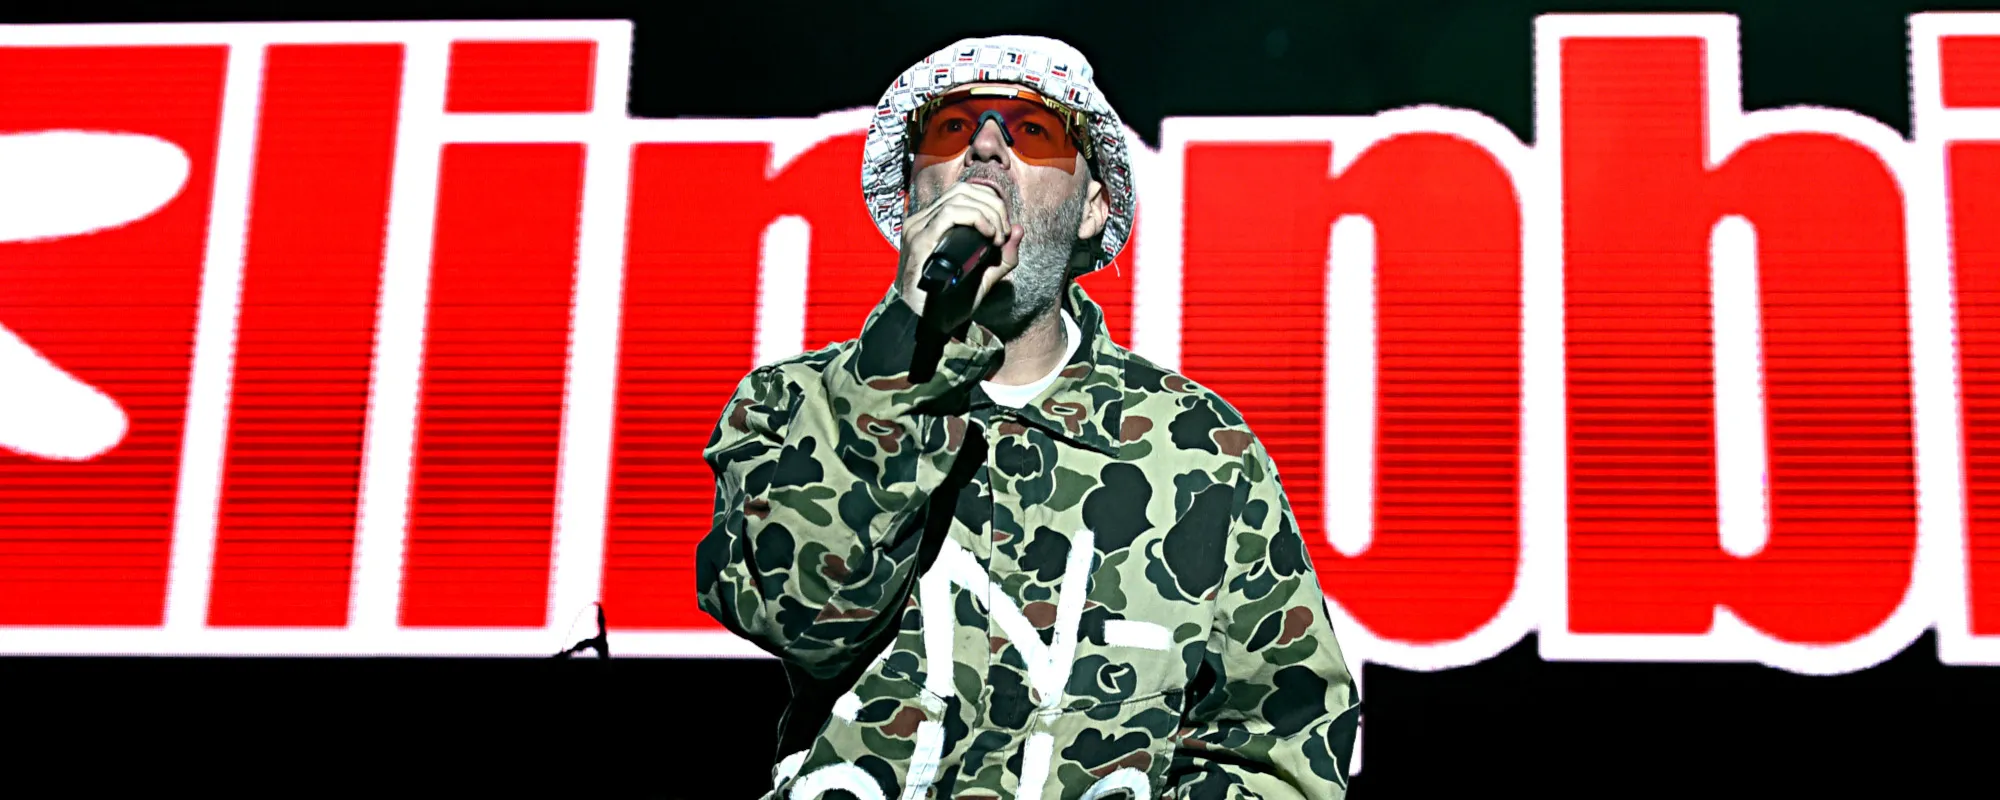 Limp Bizkit Cancels Touring Indefinitely Due to Frontman Fred Durst’s Health Issues